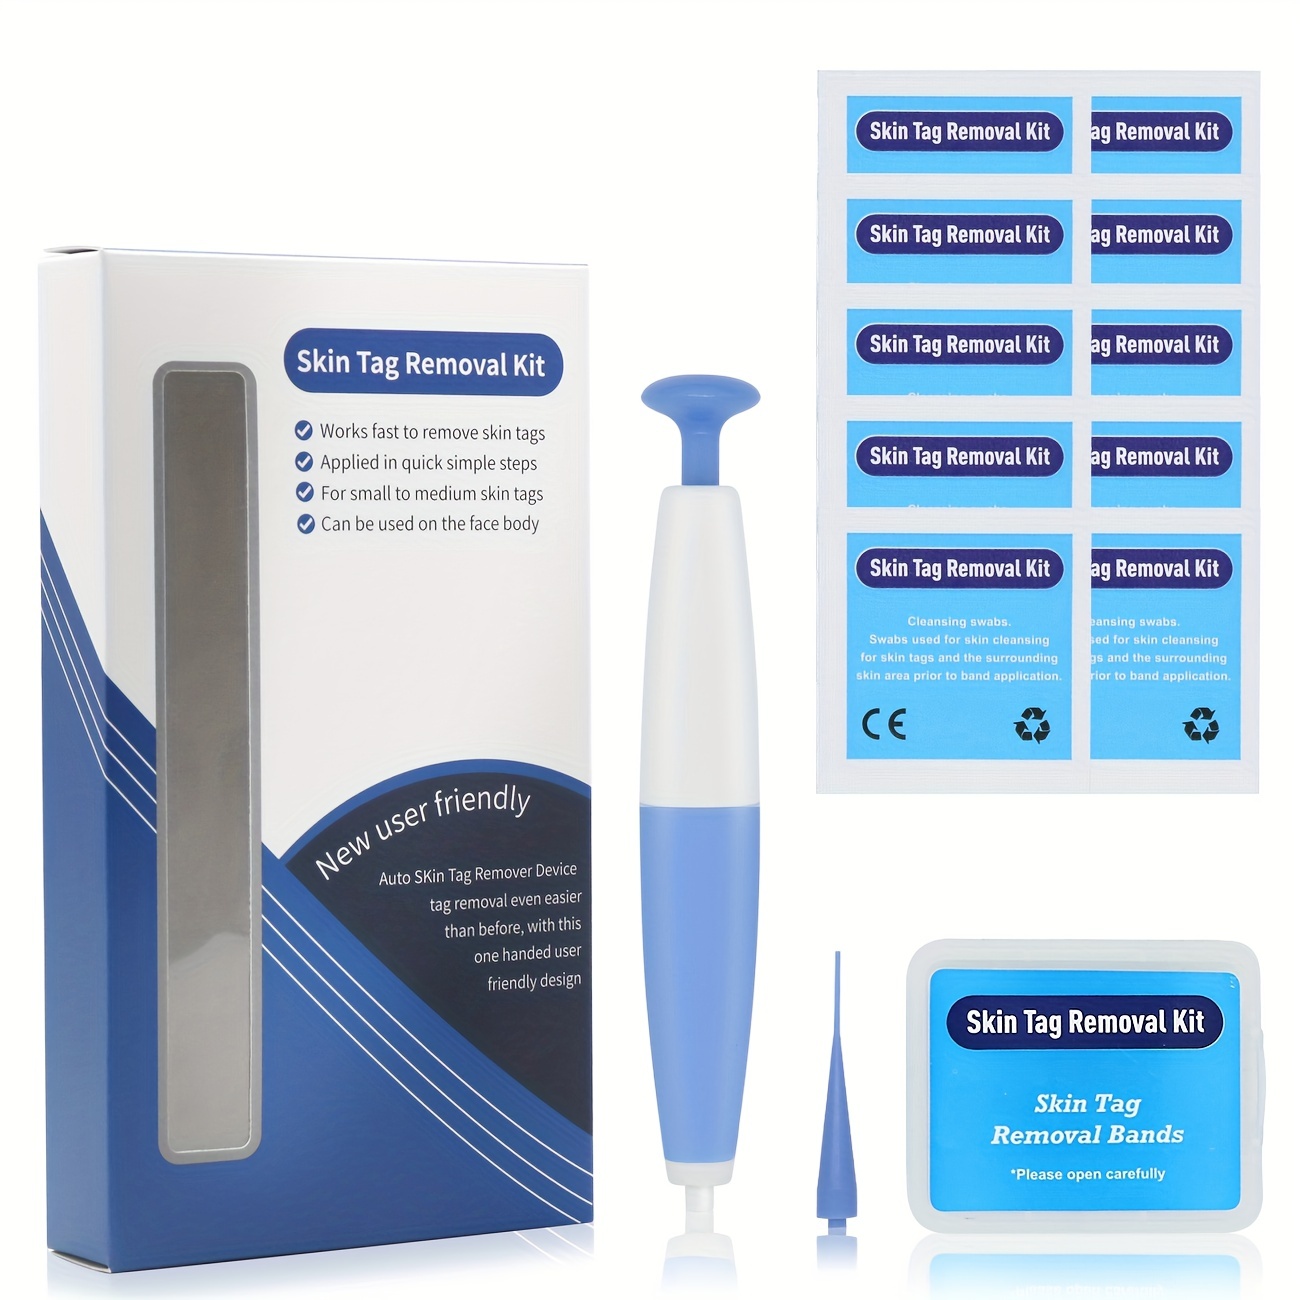 Auto Skin Tag Remover Kit - Remove Moles, Warts & Stains